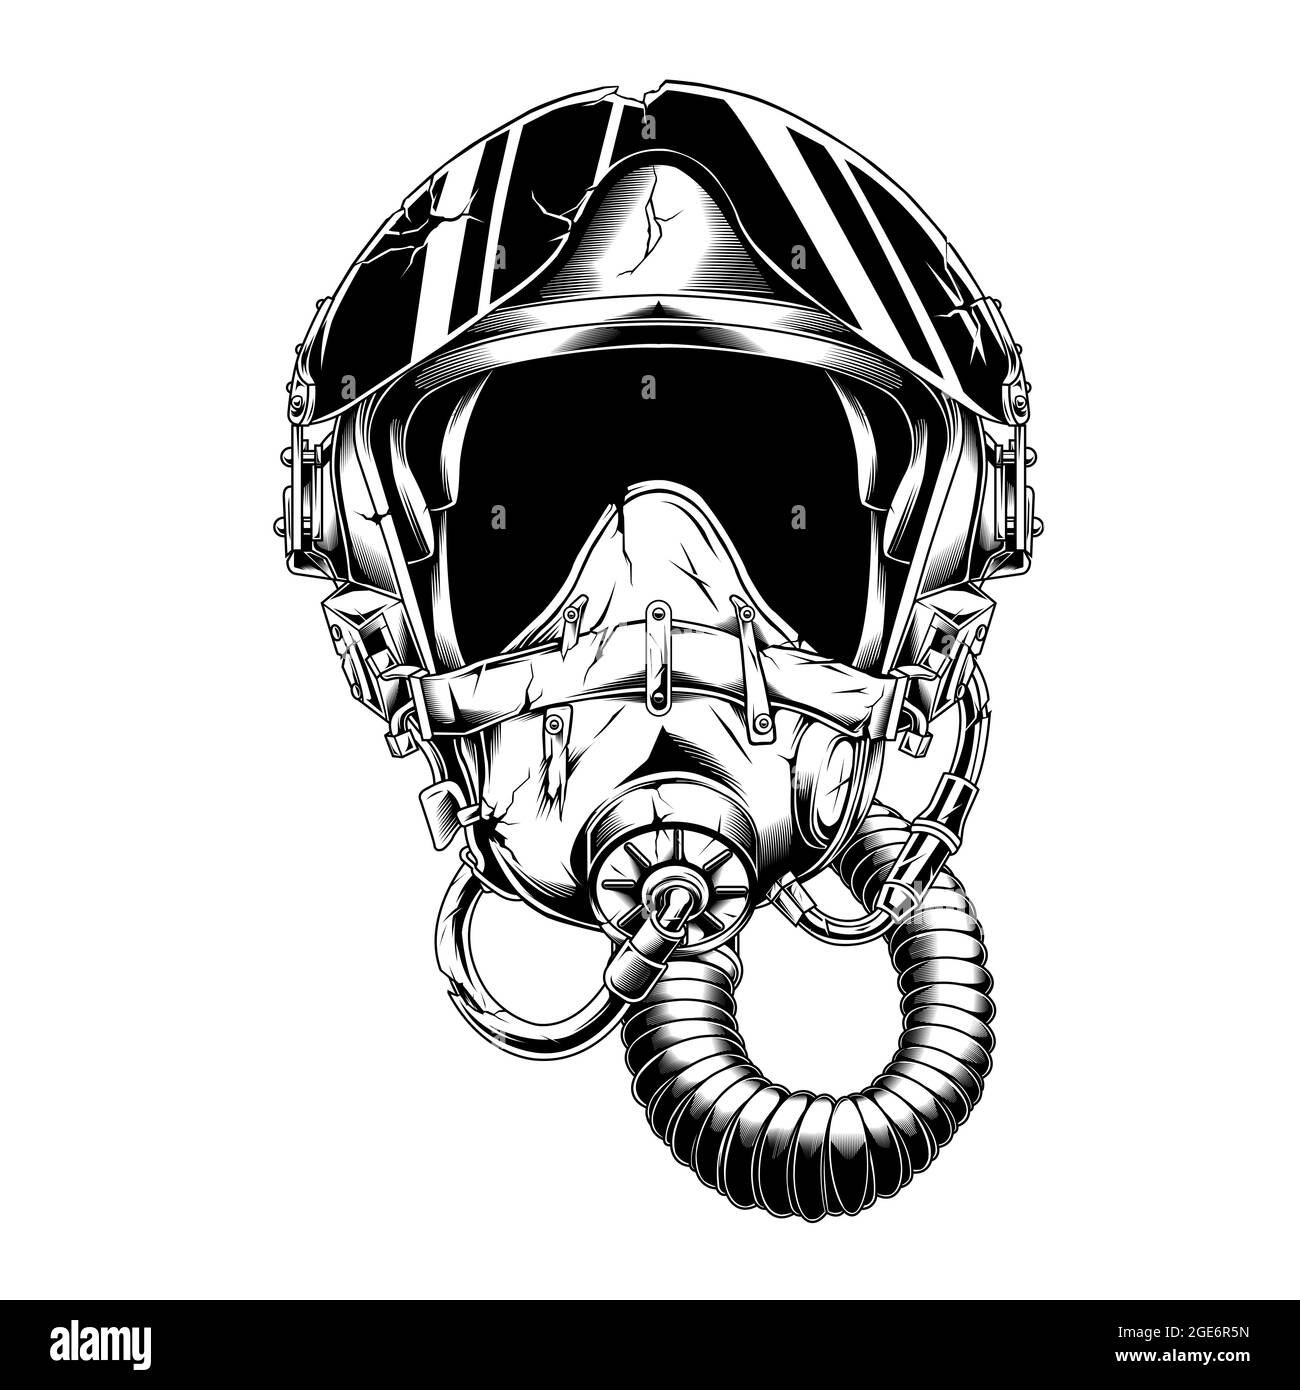 black and white helmet air force military Stock Vector